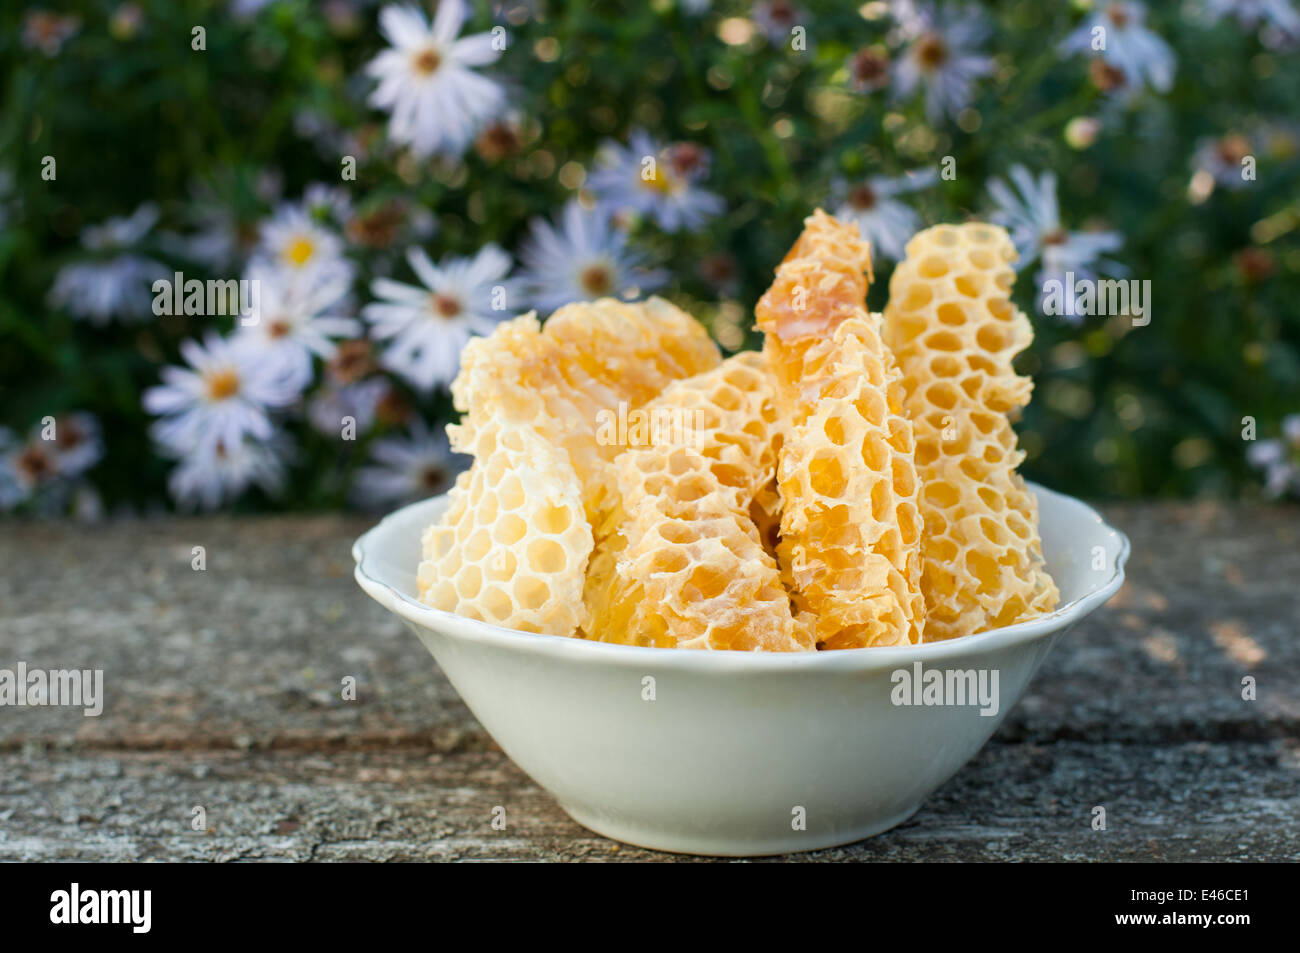 honey honeycombs beeswax food sweet natural plate pieces table stand wood old garden open air nobody flowers daisies yellow comb Stock Photo